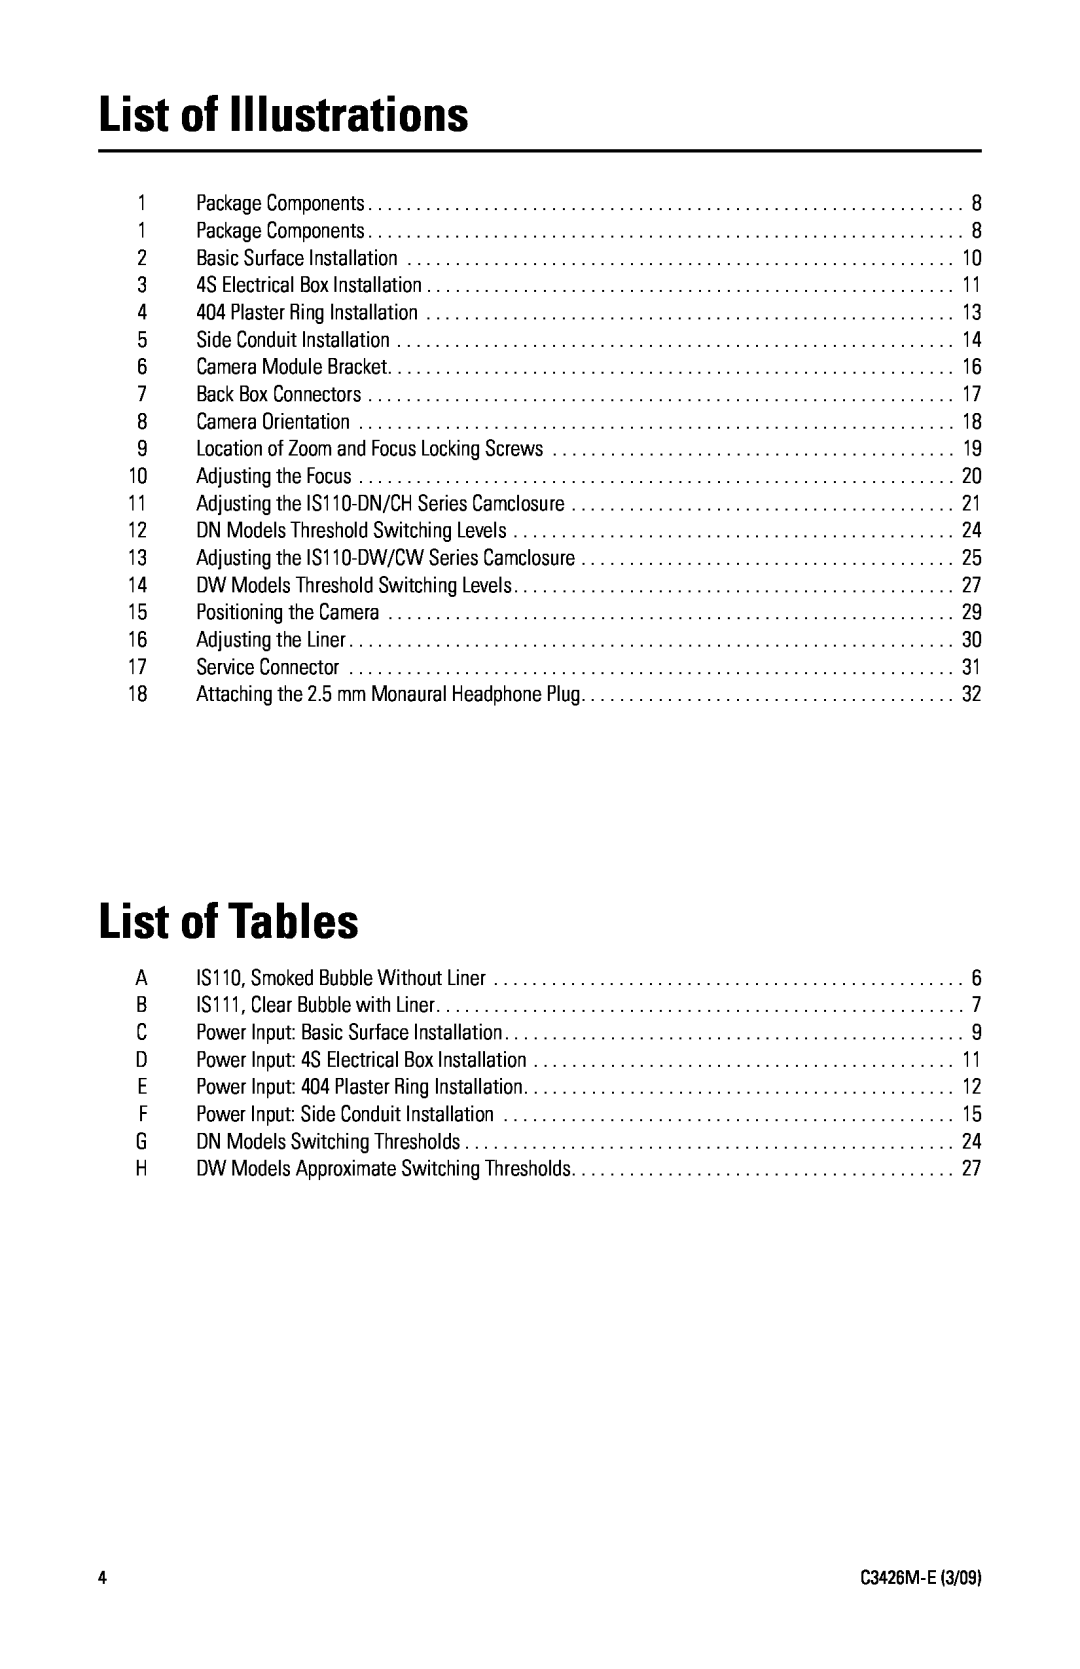 Pelco IS110 manual List of Illustrations, List of Tables 